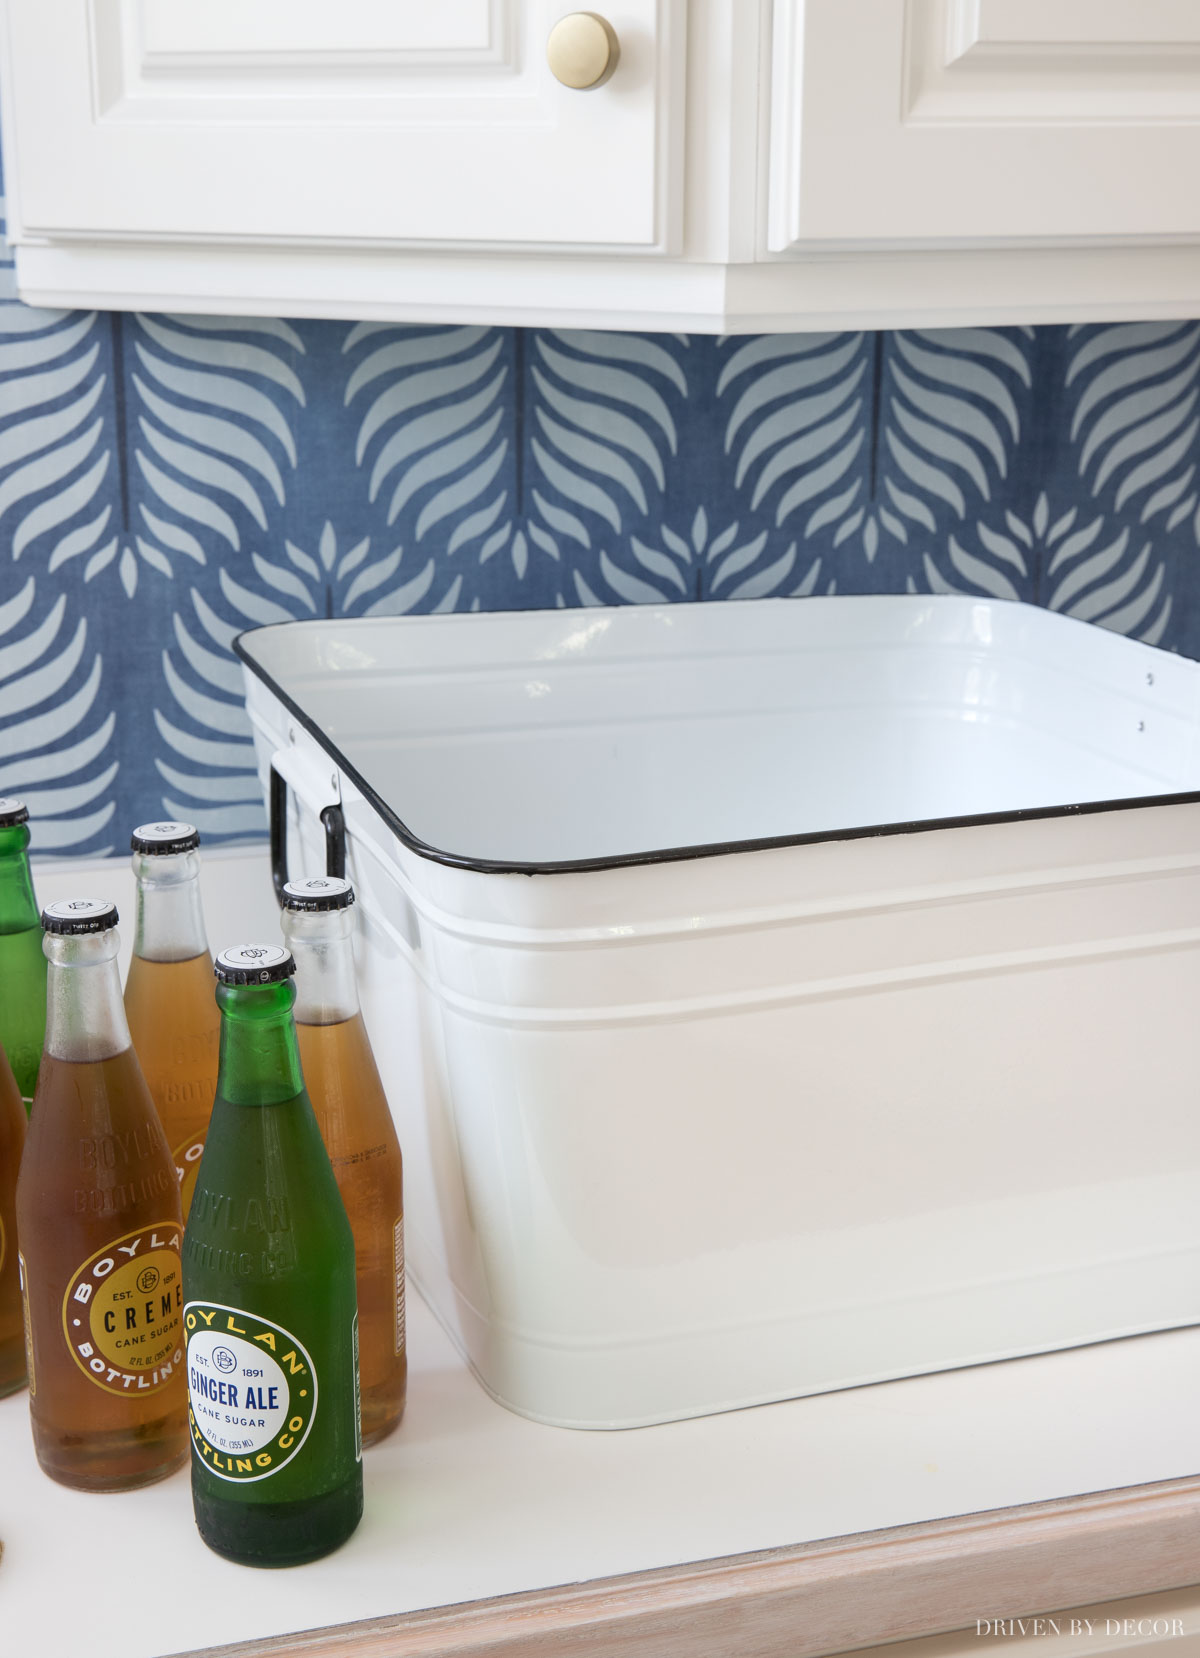 I love that you can fill this cooler with ice and drink and put it in the stand for outdoor parties!